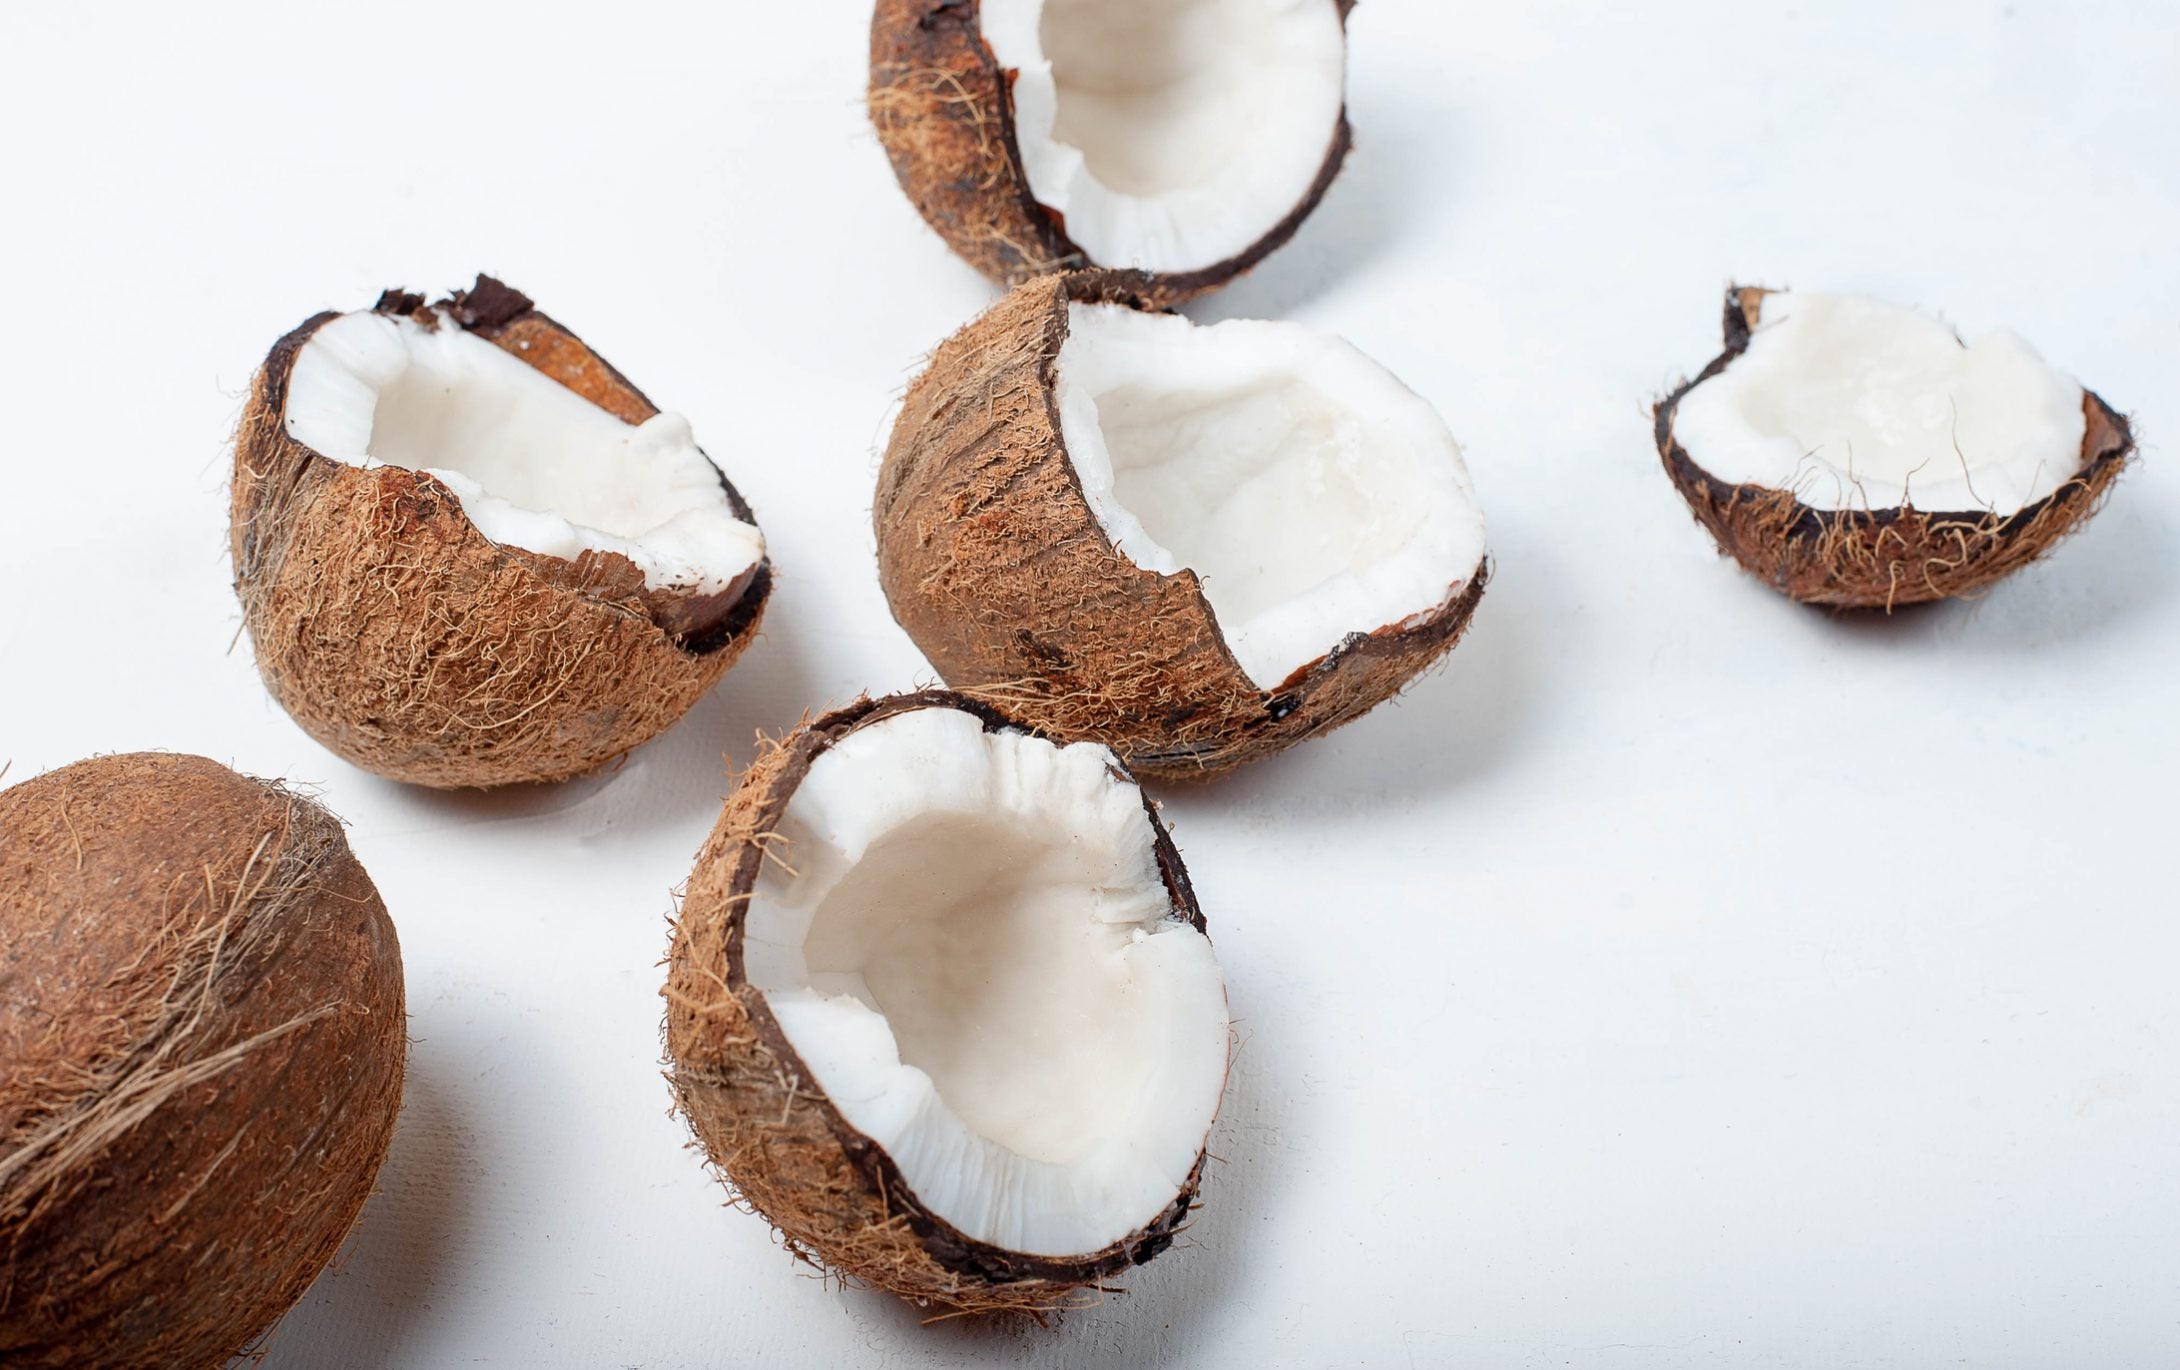 Coconuts about Christmas: Baking with the Organic Essentials